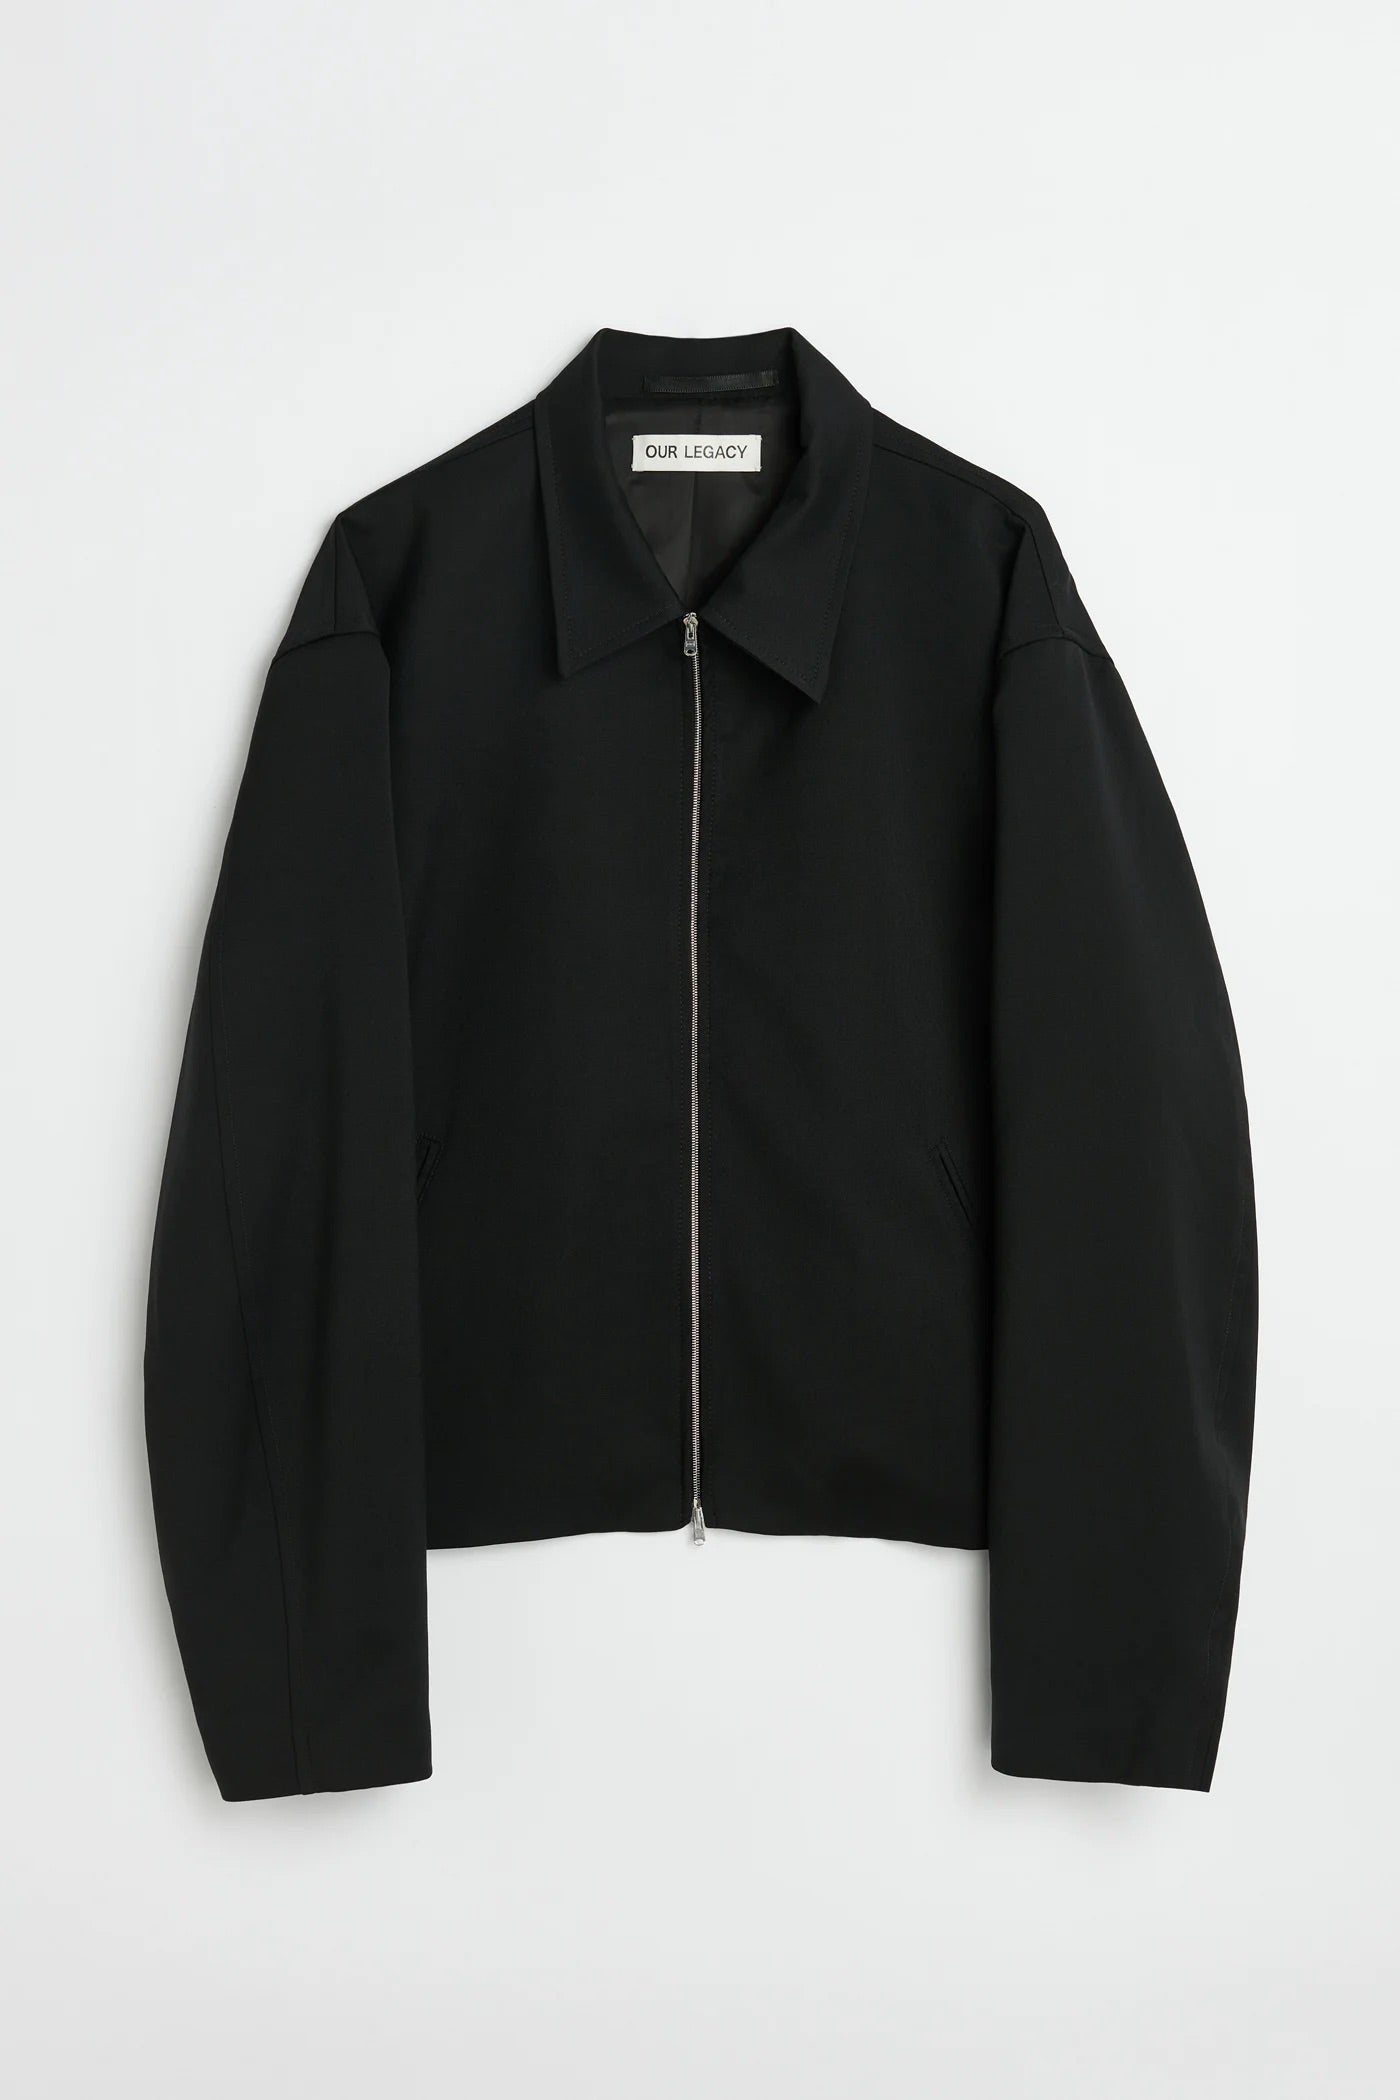 OUR LEGACY 「MINI JACKET BLACK WORSTED WOOL」 – SISTER